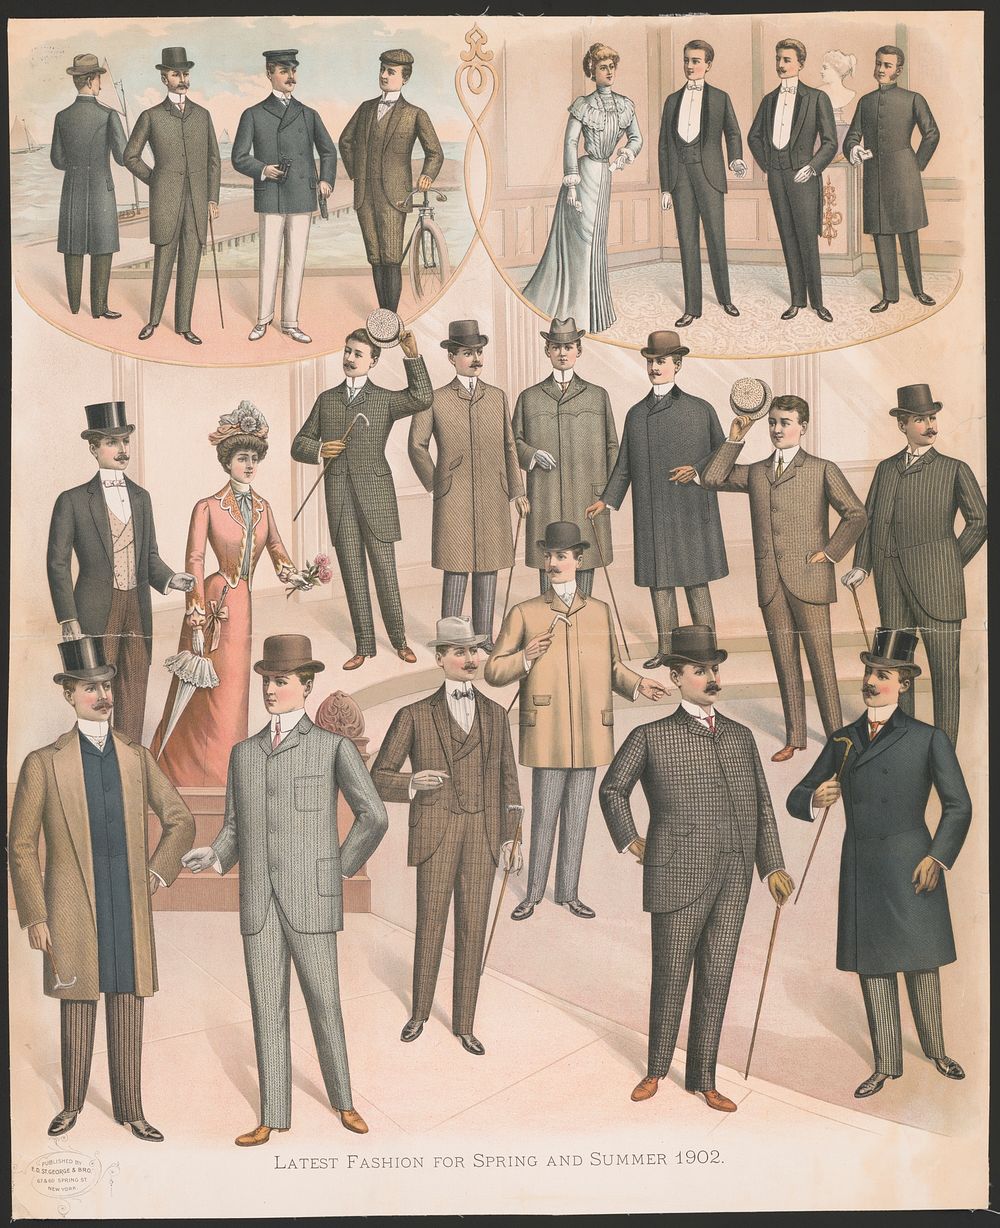 Latest fashion for spring and summer 1902